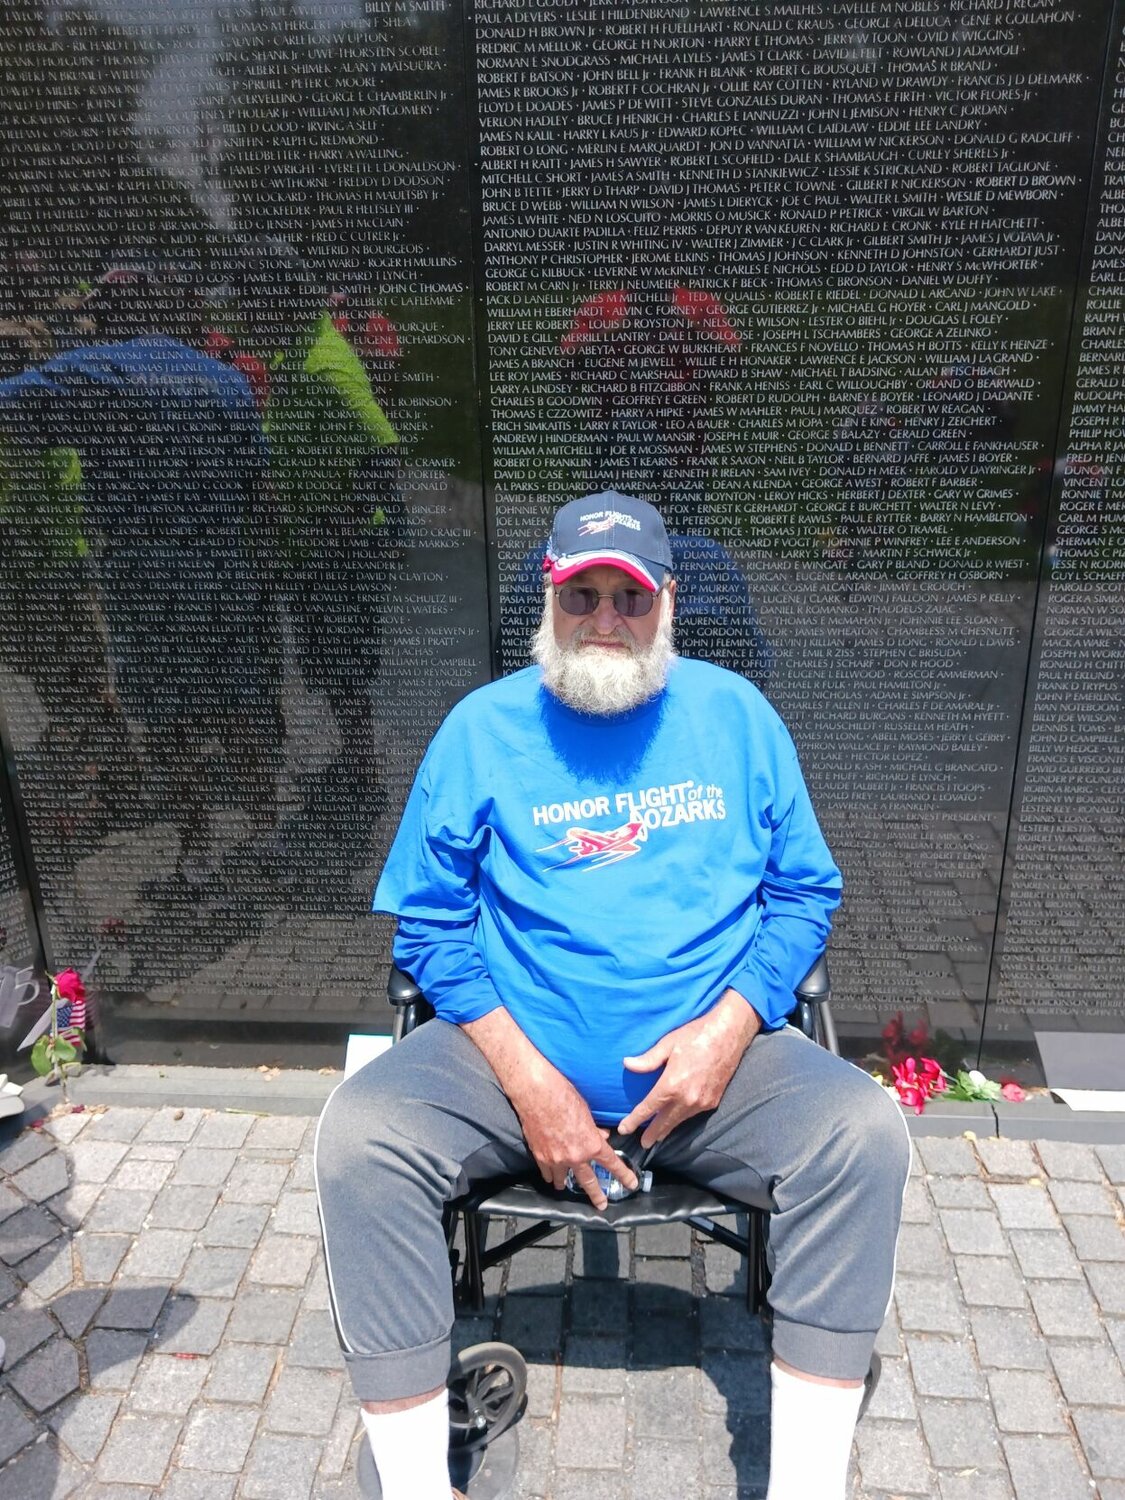 Wayne Cone sitting in front of the Memorial to the 58,000 killed in the Vietnam War. CONTRIBUTED PHOTO